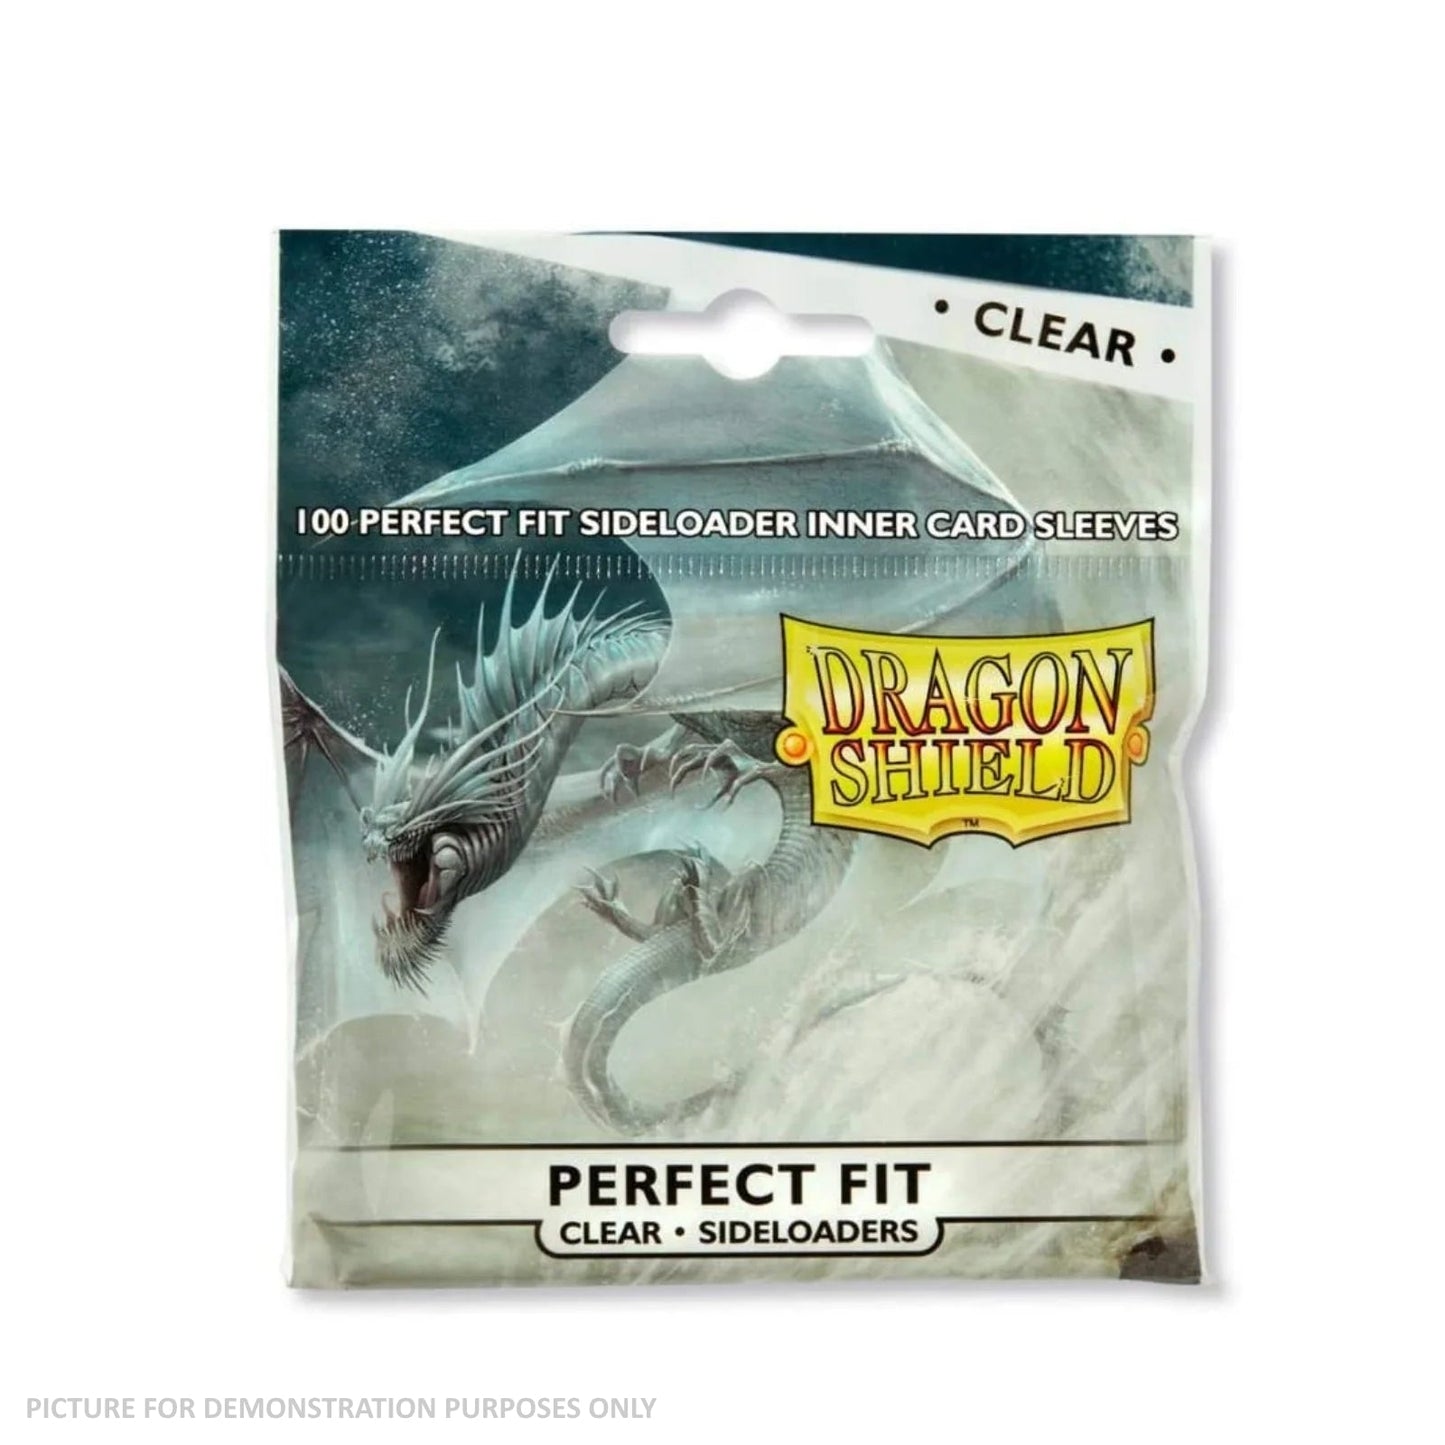 Dragon Shield 100 Perfect Fit SIDELOADING Sleeves - Clear